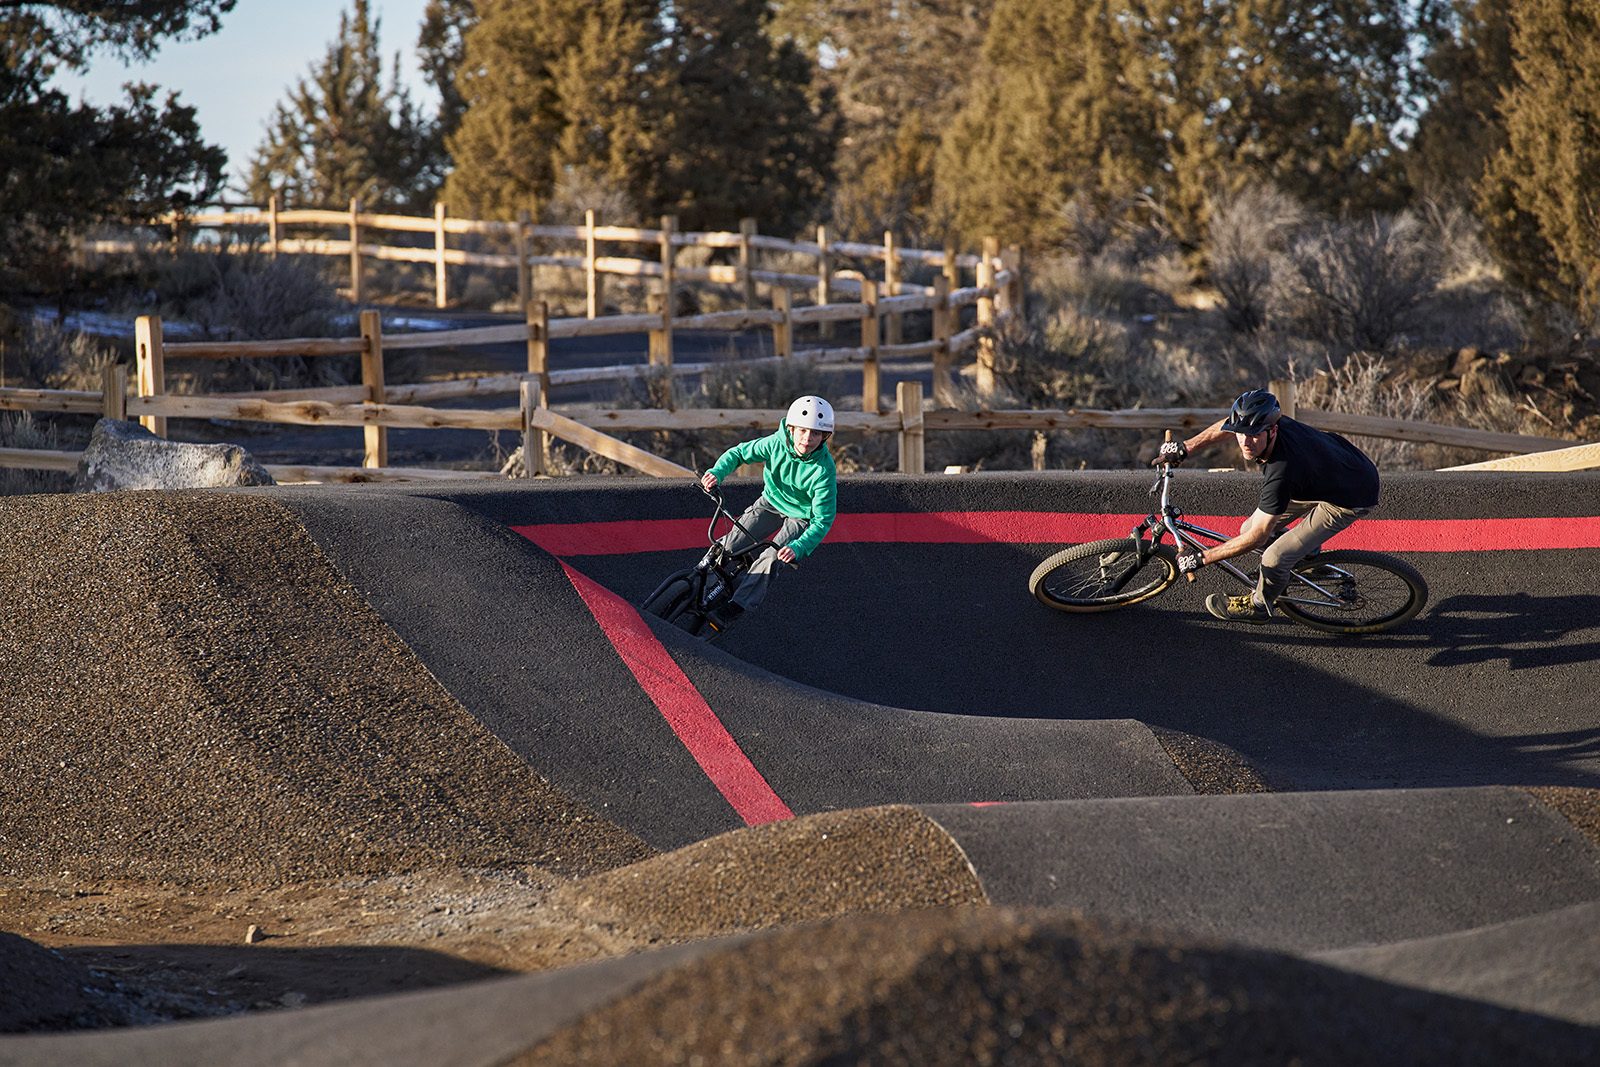 The new pump track at Big Sky Bike Park in Bend, OR